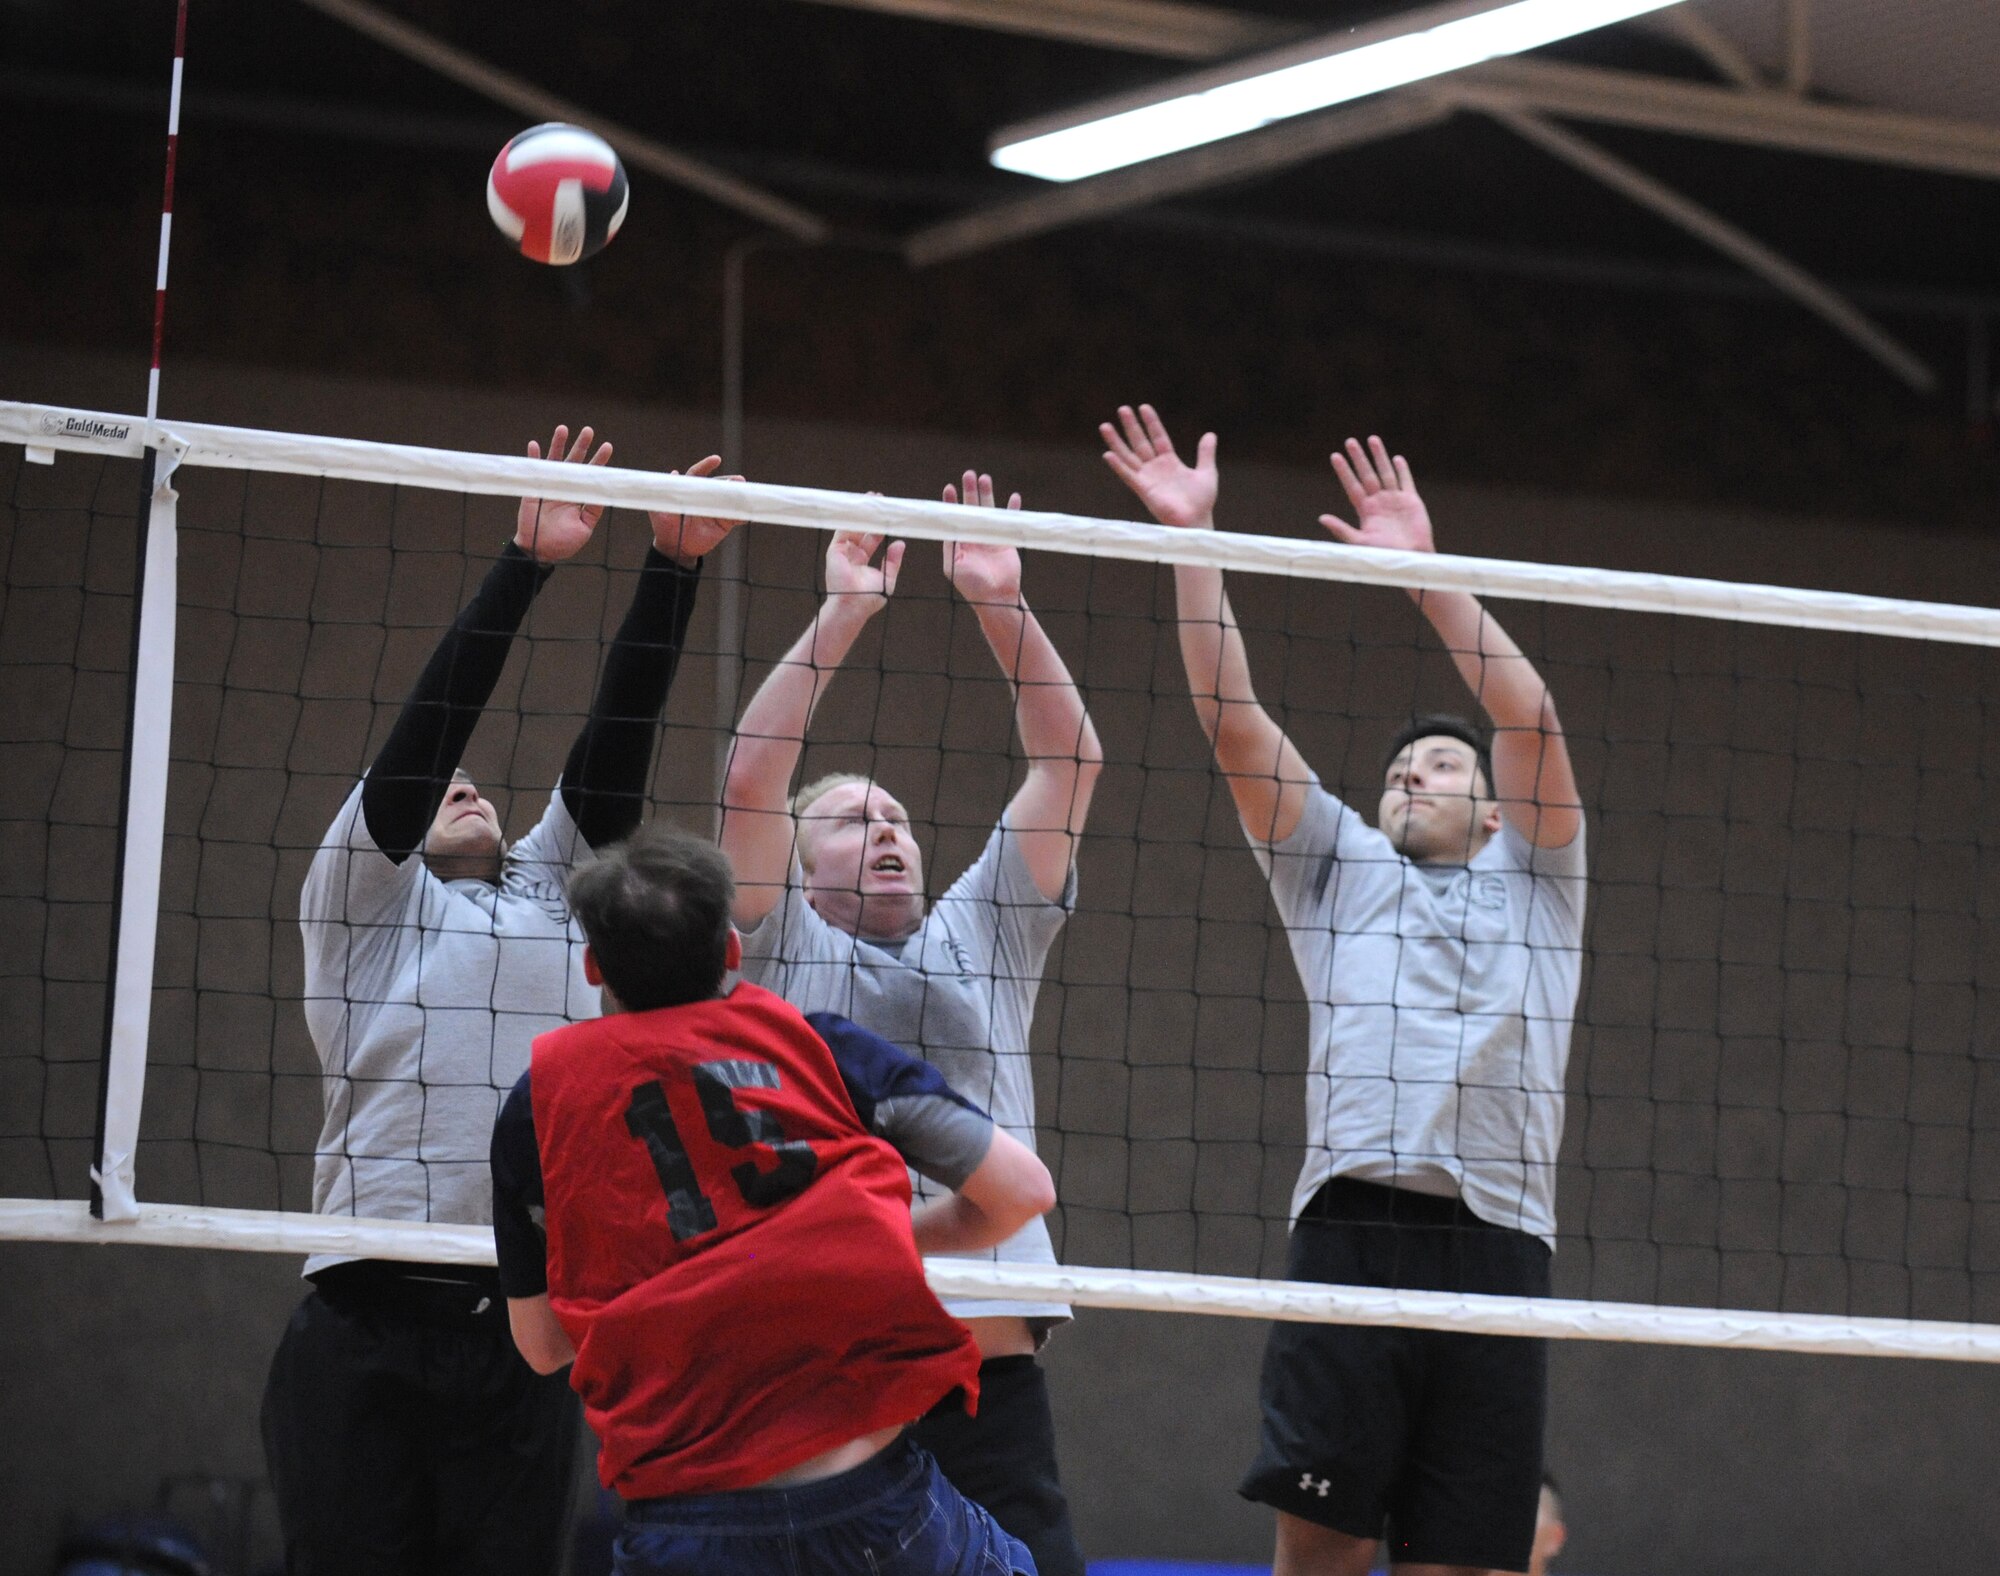 SPANGDAHLEM AIR BASE, Germany – Allen Pratt, 52nd Medical Group, spikes the ball as 52nd Civil Engineer Squadron defenders attempt to block the shot during the intramural volleyball championship series here May 9. The CES defeated MDG 25-16, 19-25, 15-10 to become the intramural volleyball champions. (U.S. Air Force photo/Senior Airman Nathanael Callon)